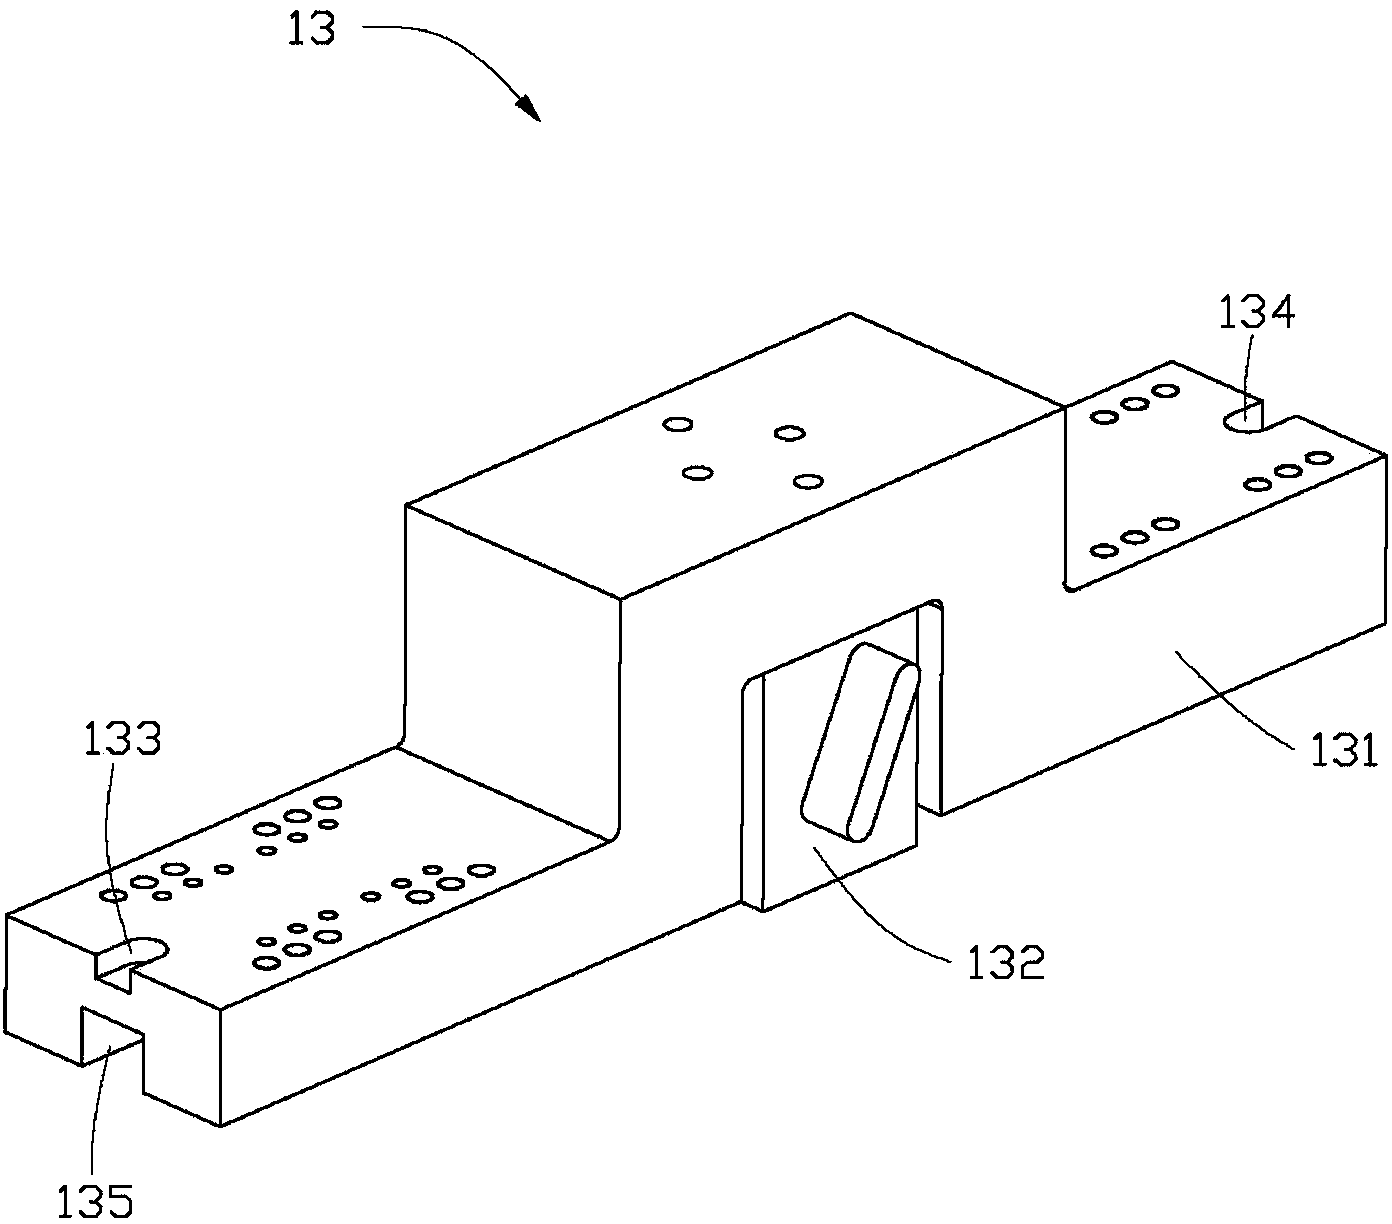 Rolling bearing vibration detection device and analysis method